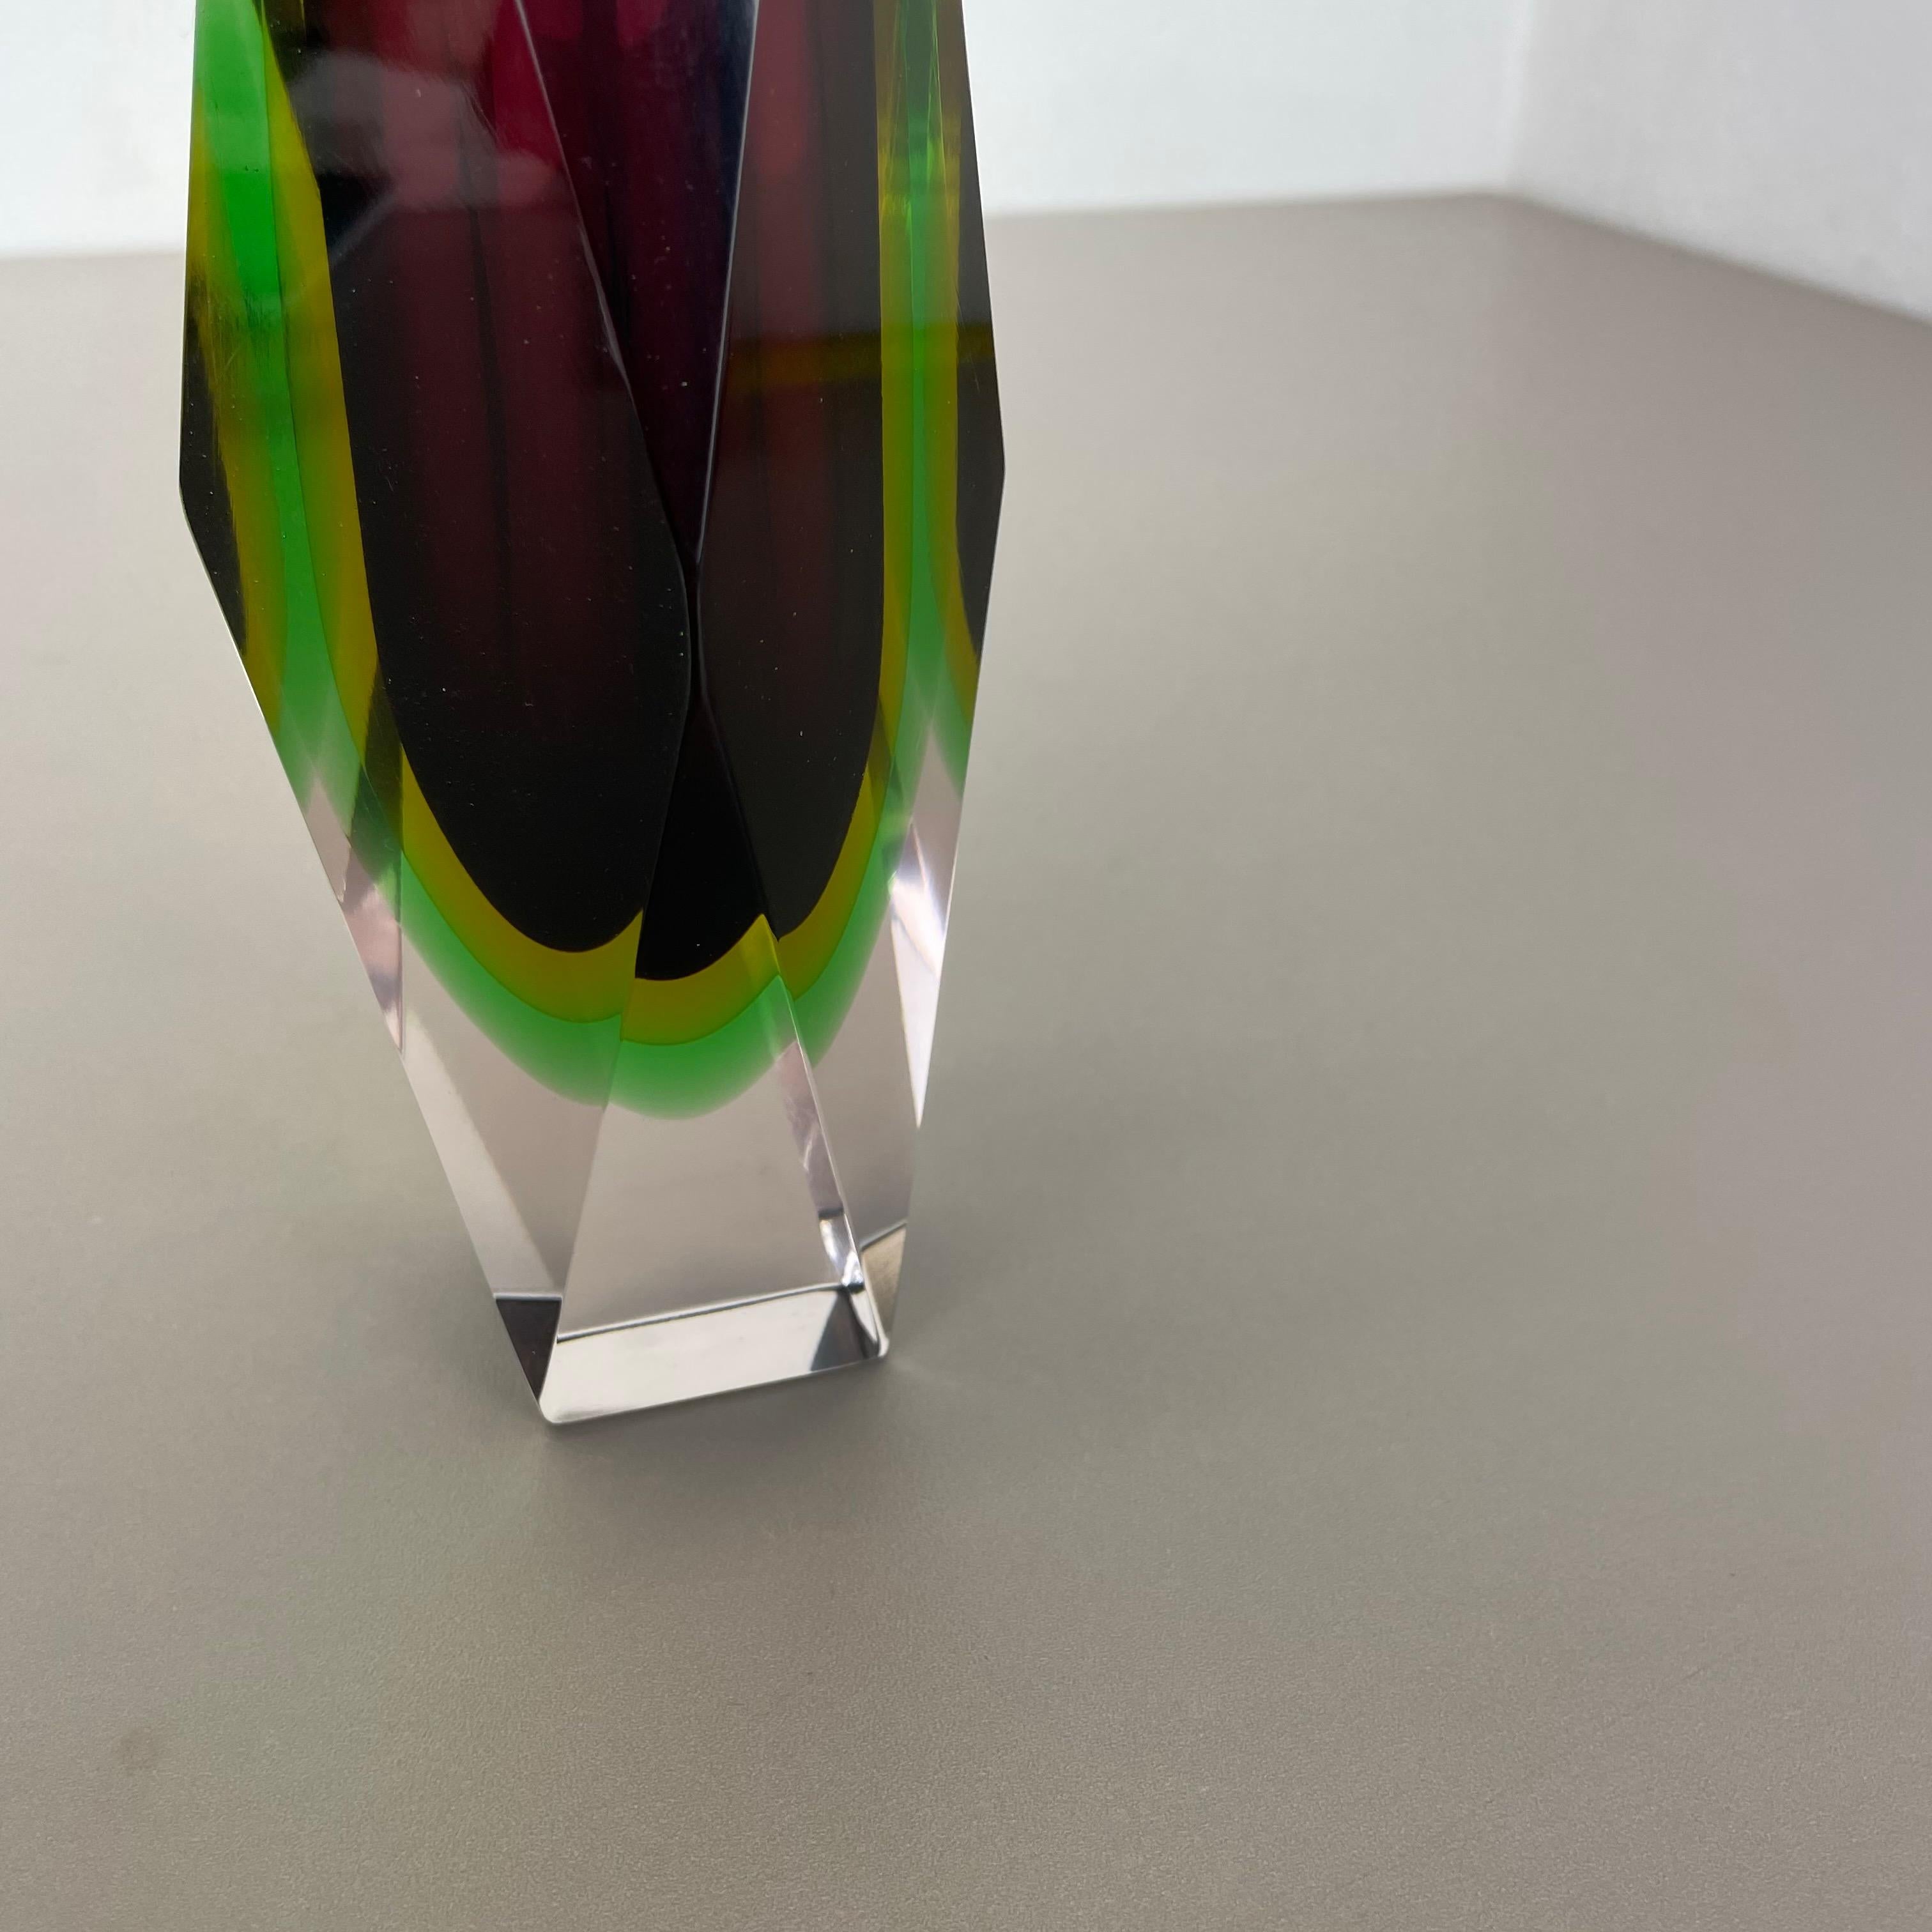 Heavy Large Murano Glass Sommerso 4 Colors Vase by Flavio Poli, Italy, 1970s For Sale 7